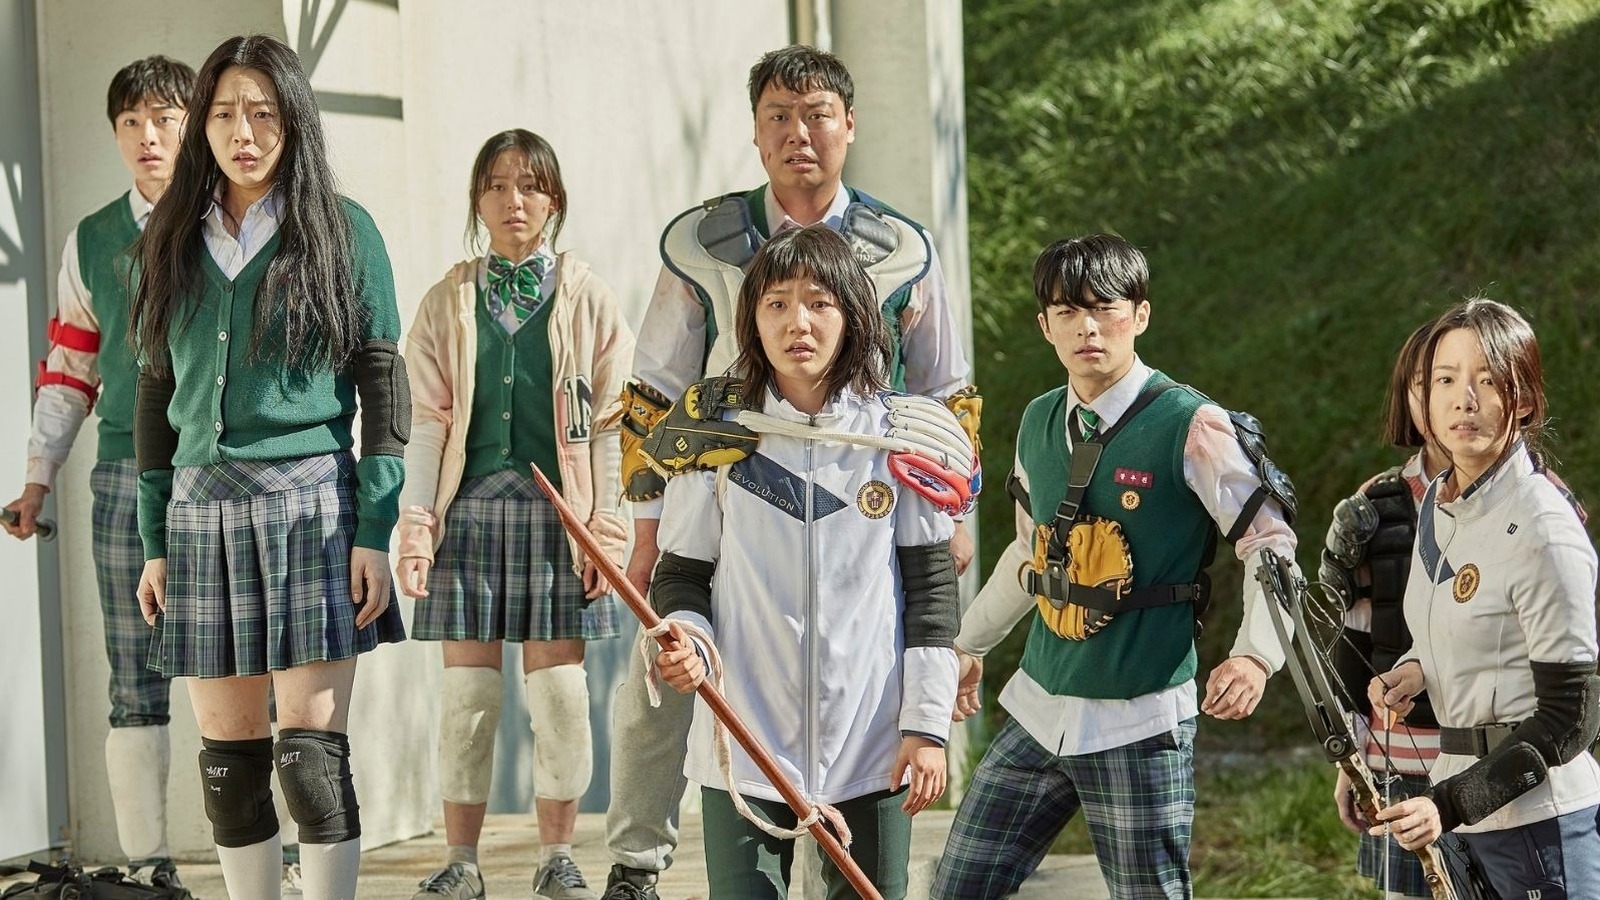 All of Us Are Dead: Netflix's Korean zombie show will blow you